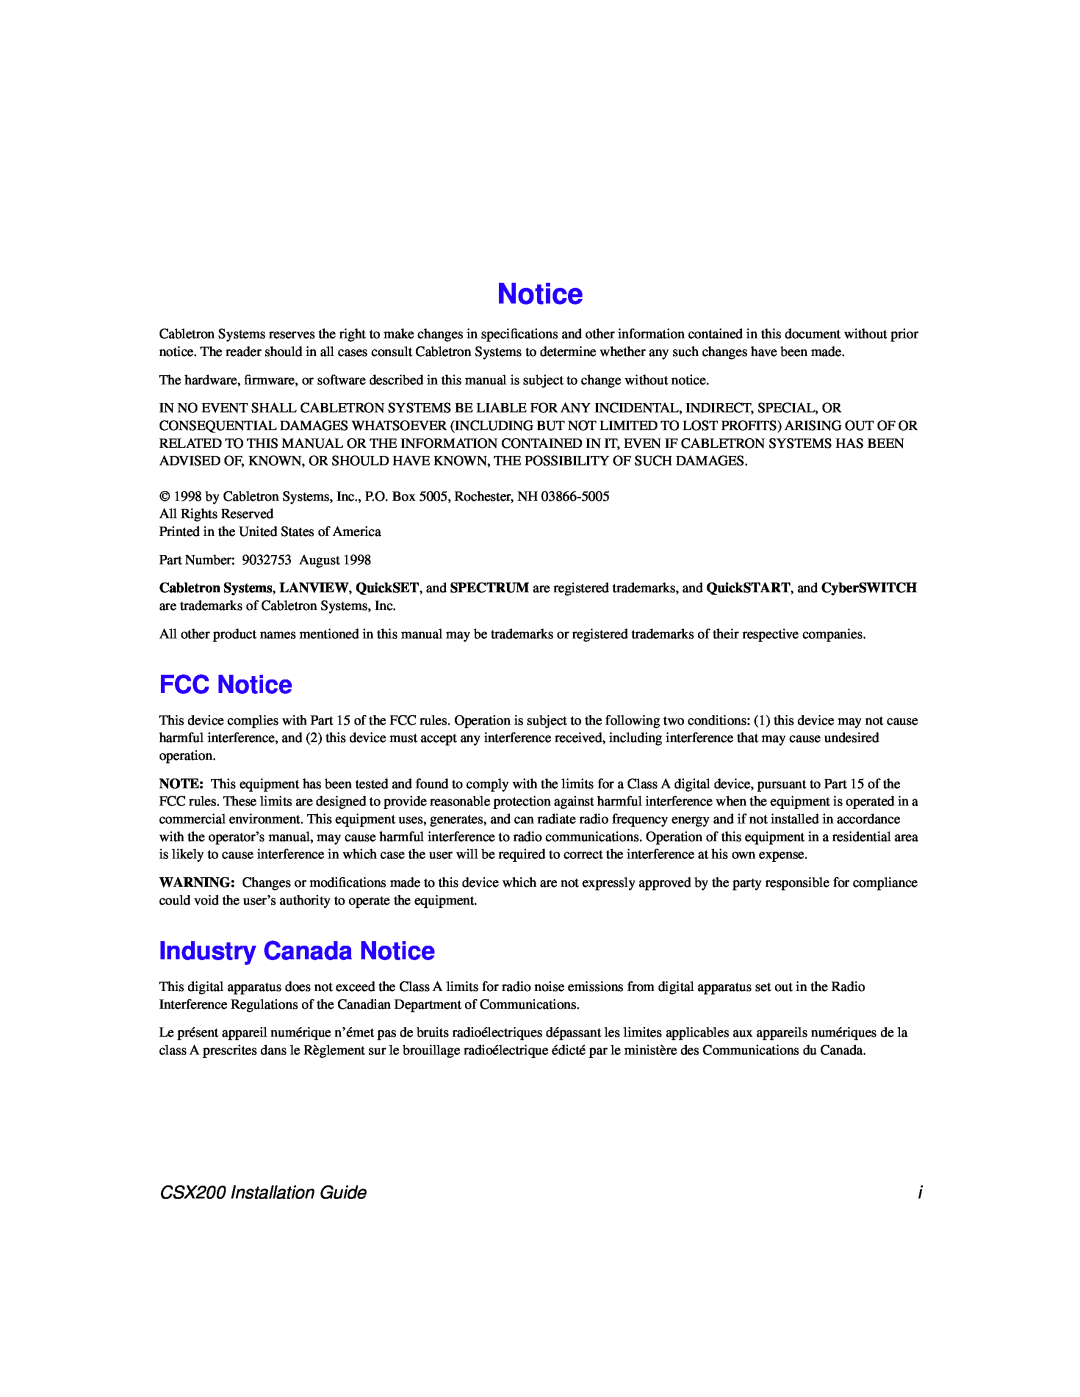 Cabletron Systems manual FCC Notice, Industry Canada Notice, CSX200 Installation Guide 